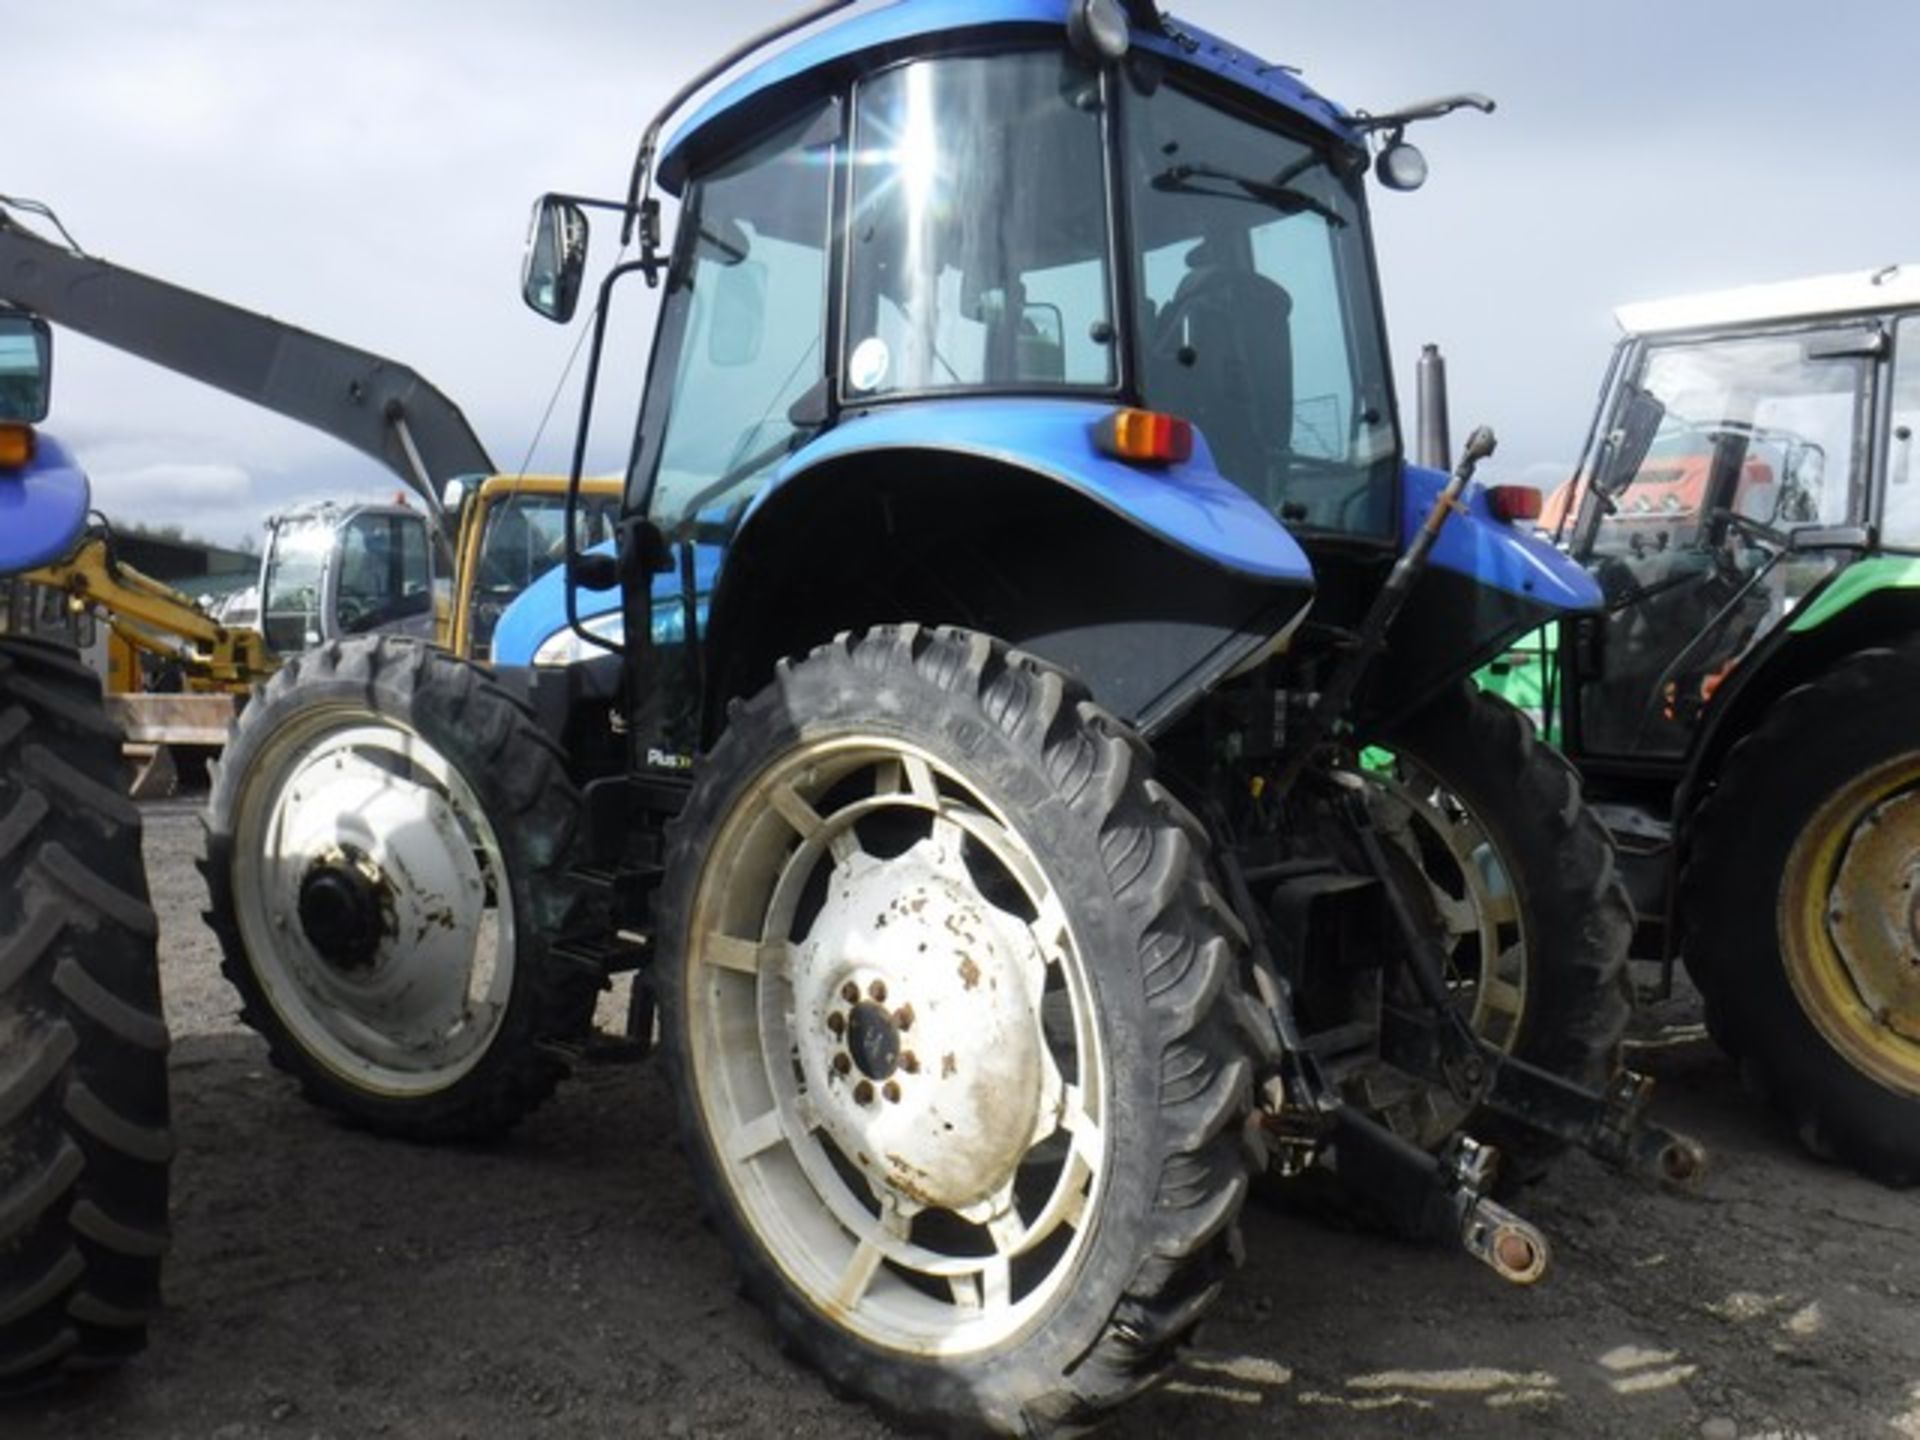 NEW HOLLAND TD5050 - 4485cc - Image 4 of 9